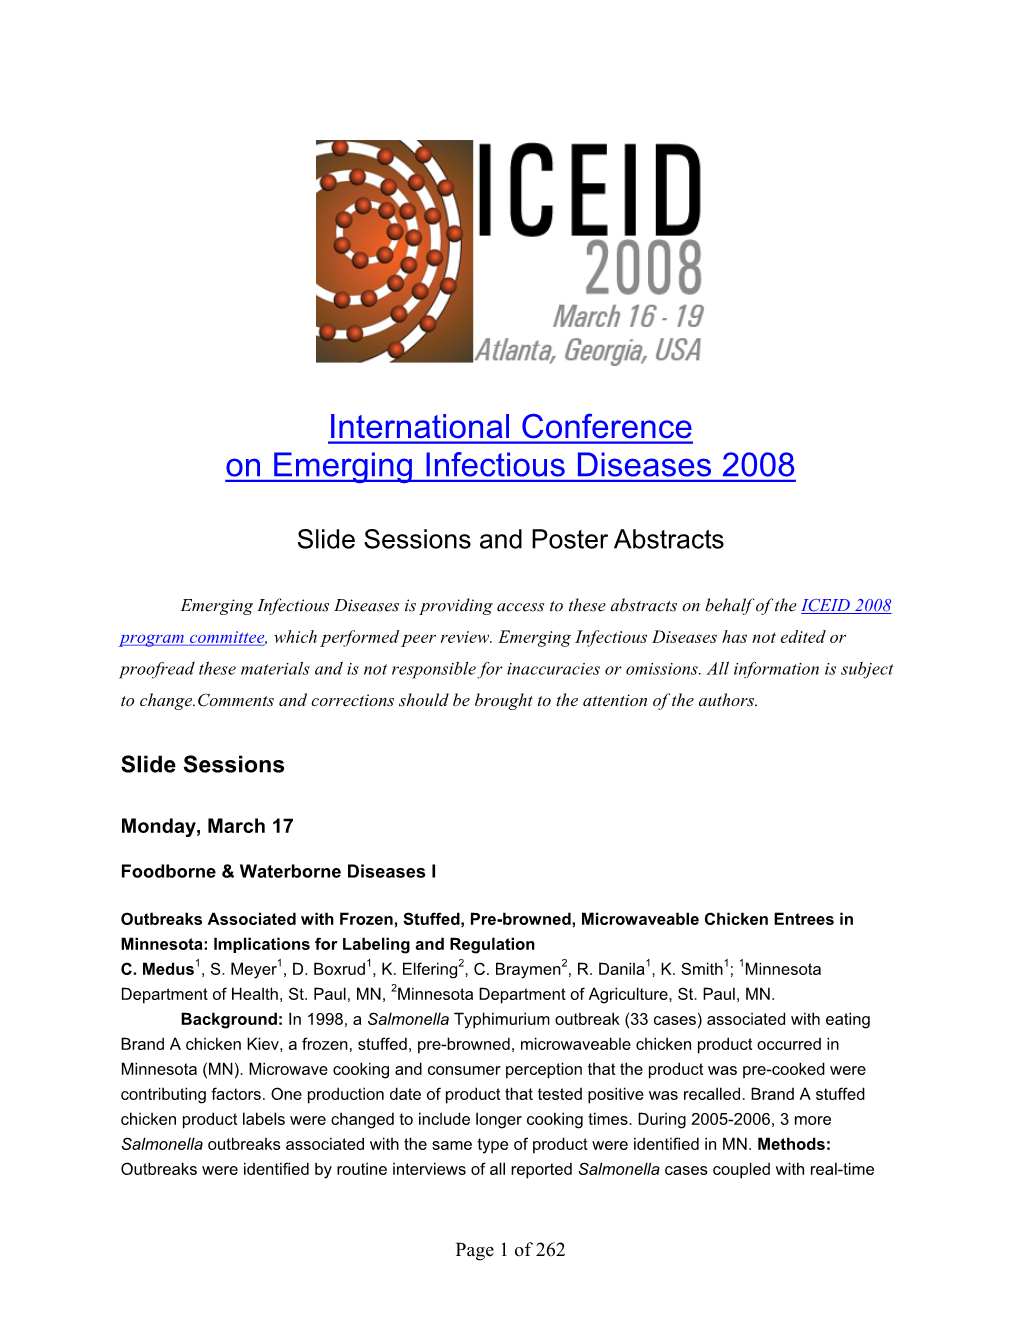 International Conference on Emerging Infectious Diseases 2008